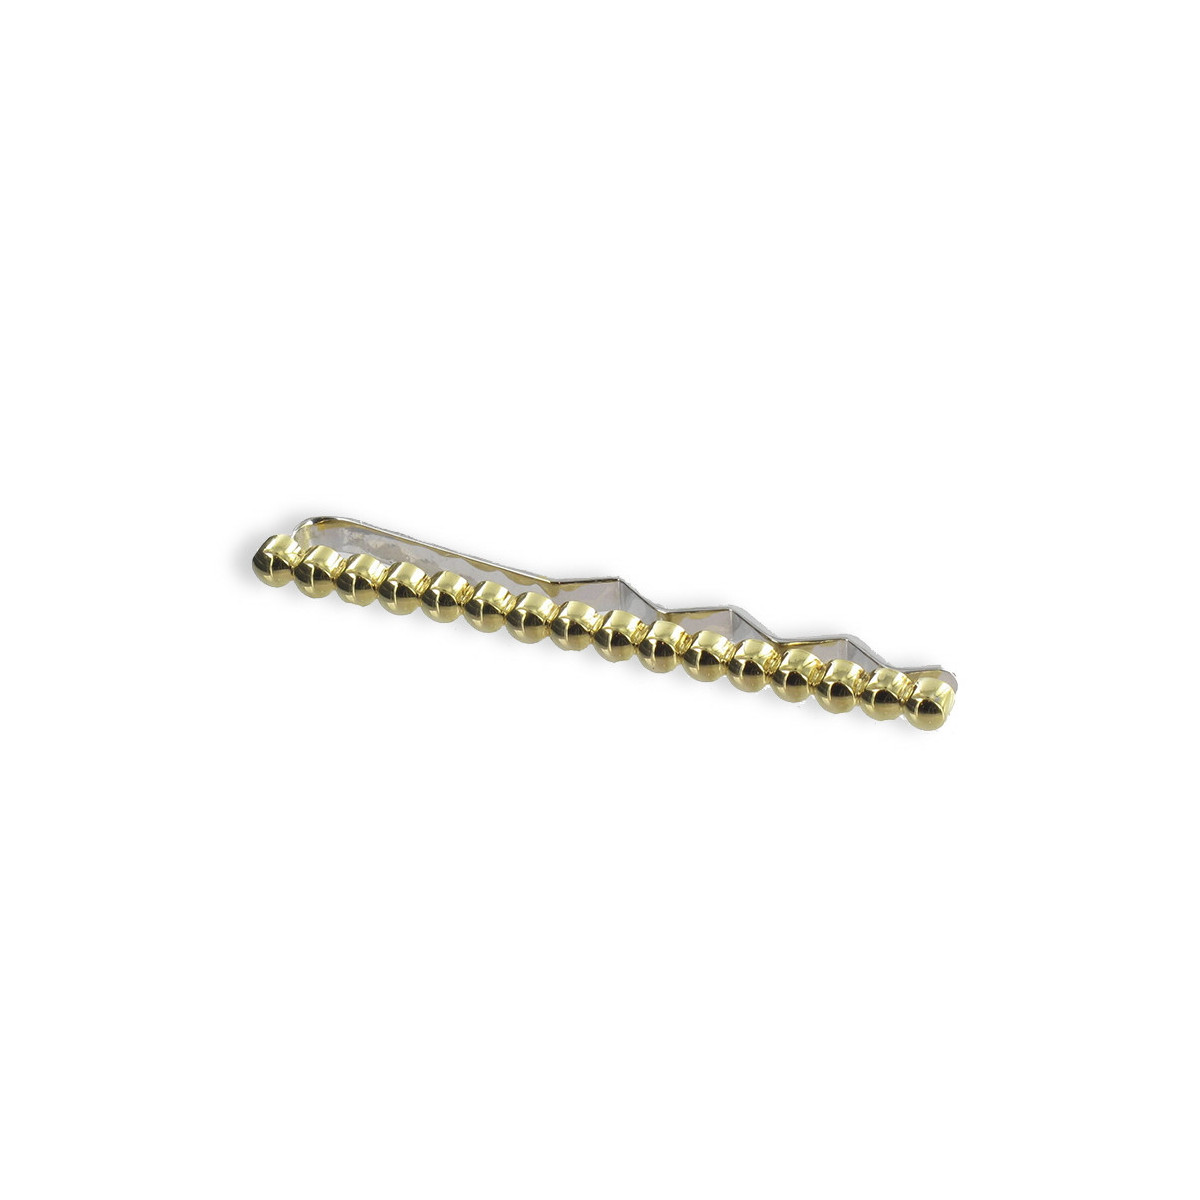 TIE CLIP IN YELLOW GOLD